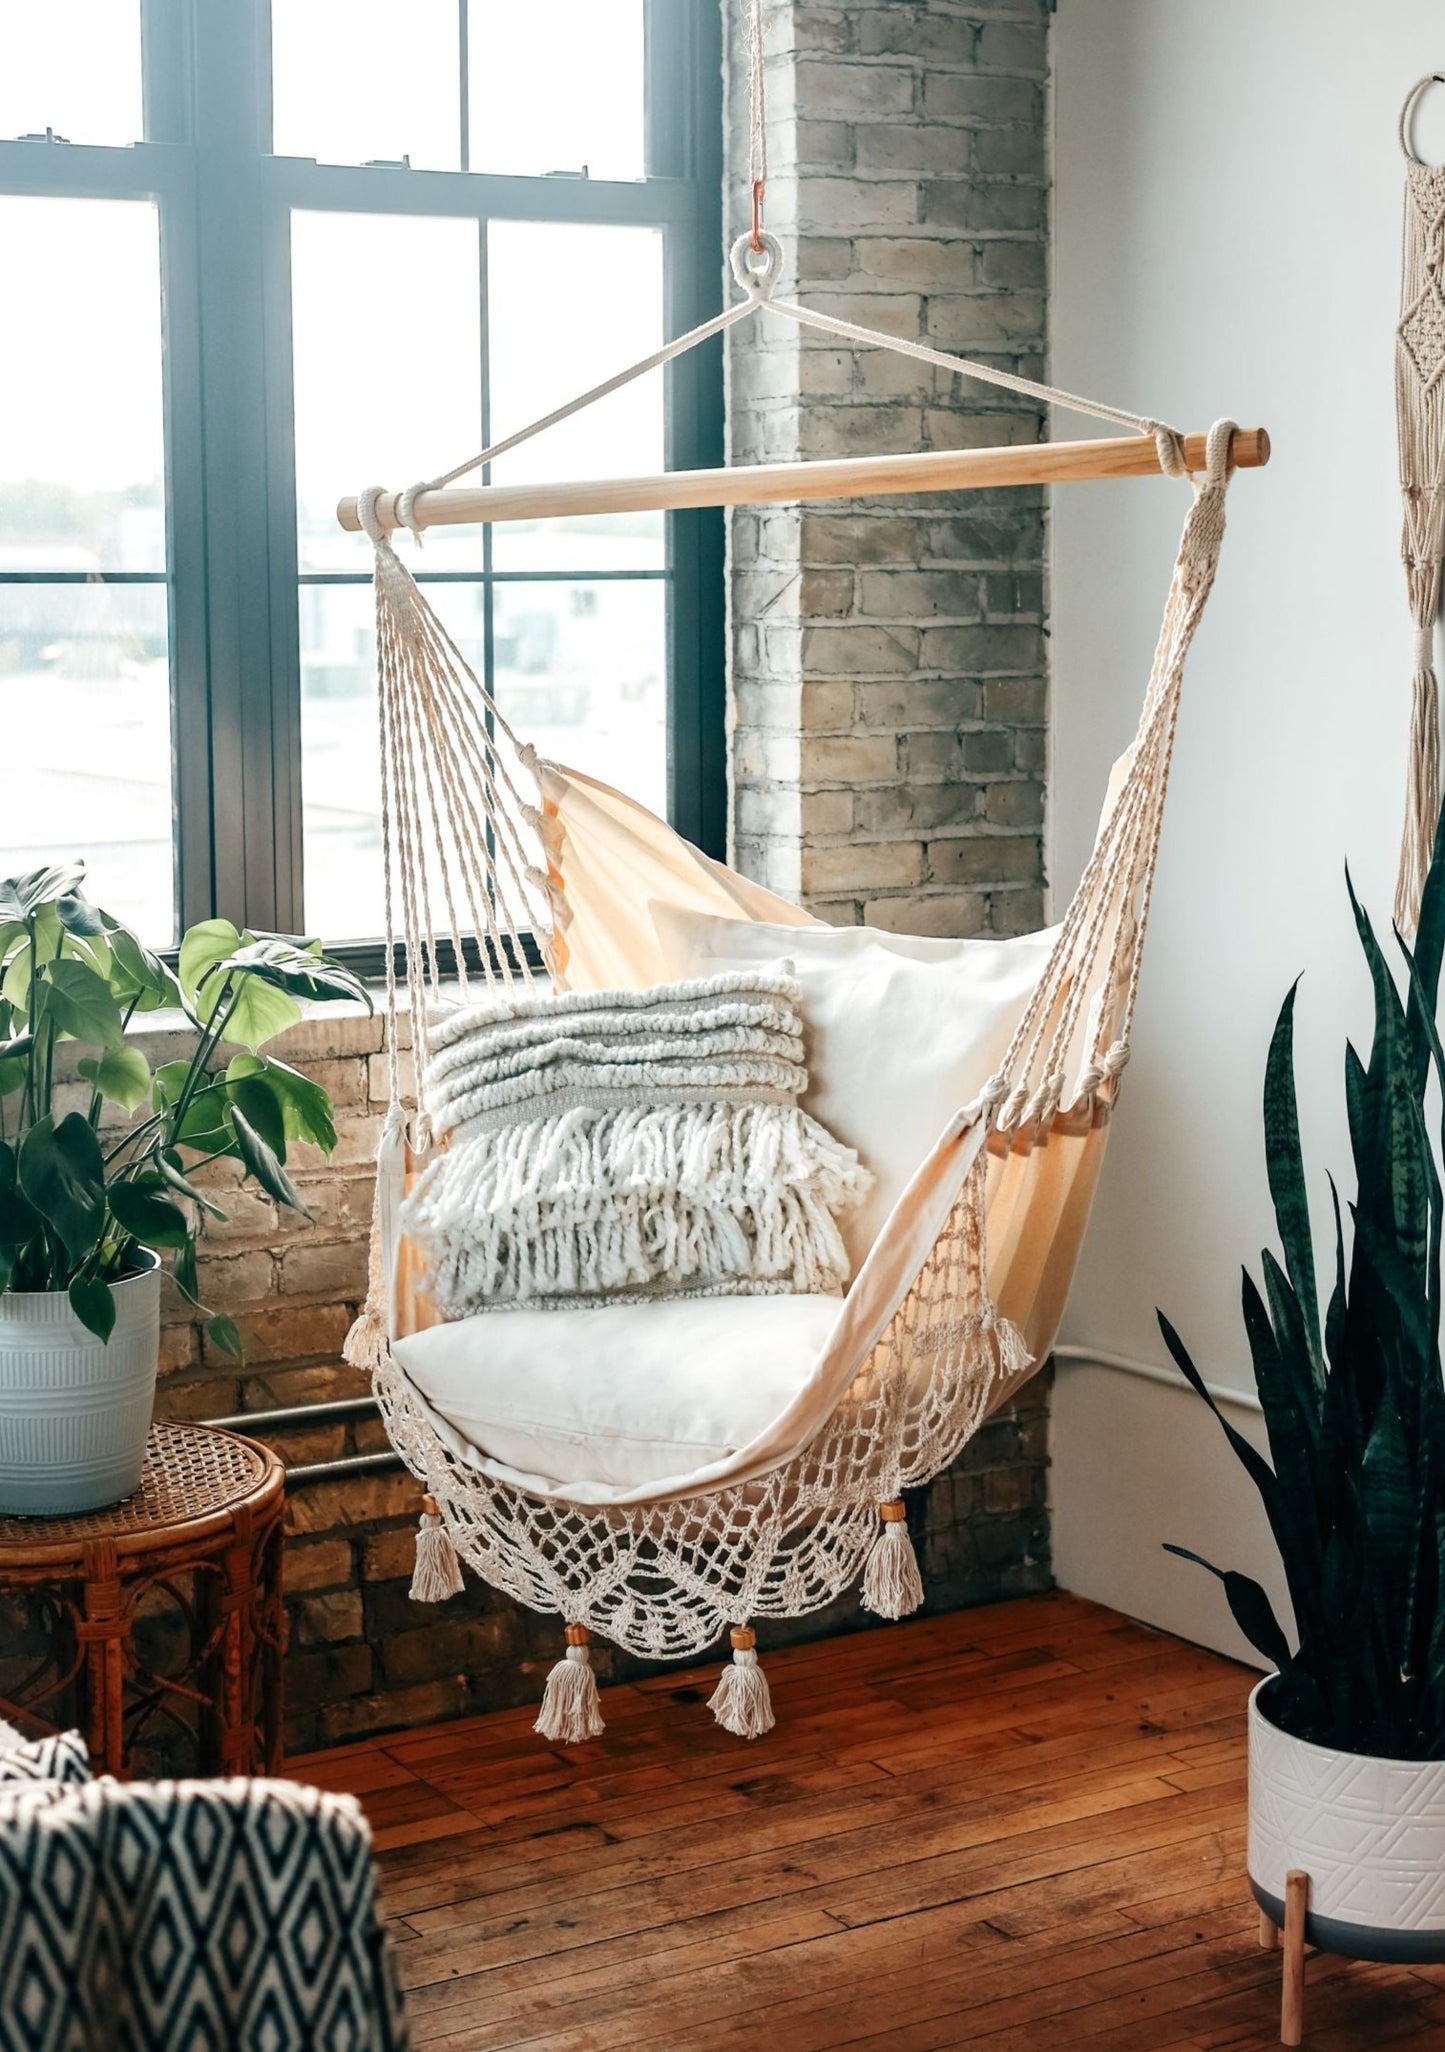 indoor crochet hammock swing chair in an apartment with brick walls